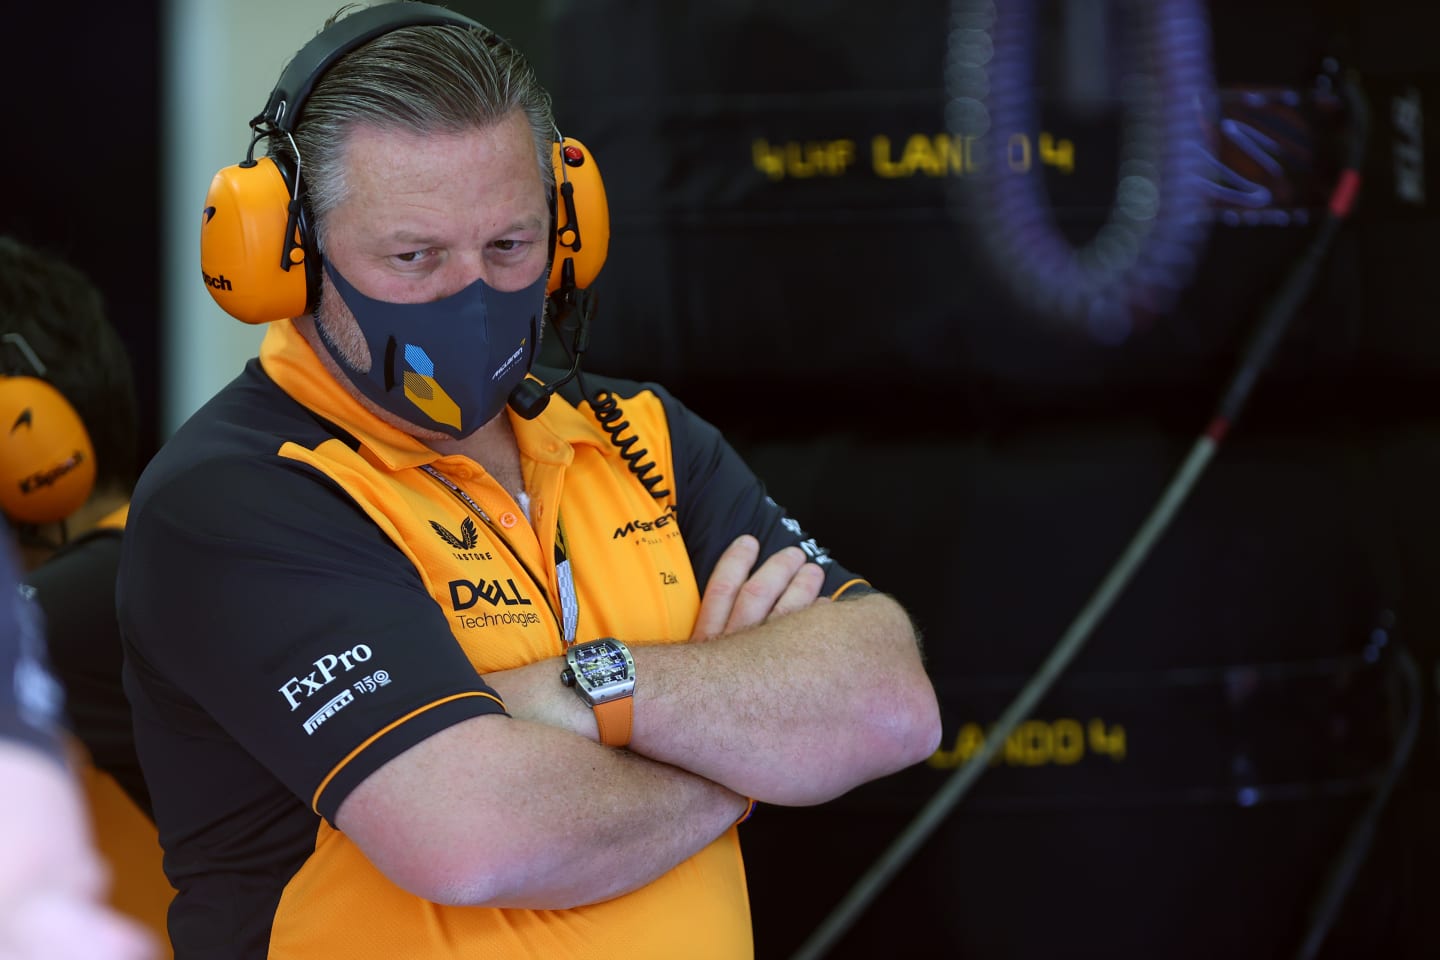 BAHRAIN, BAHRAIN - MARCH 11: McLaren Chief Executive Officer Zak Brown looks on in the garage during Day Two of F1 Testing at Bahrain International Circuit on March 11, 2022 in Bahrain, Bahrain. (Photo by Dan Istitene - Formula 1/Formula 1 via Getty Images)